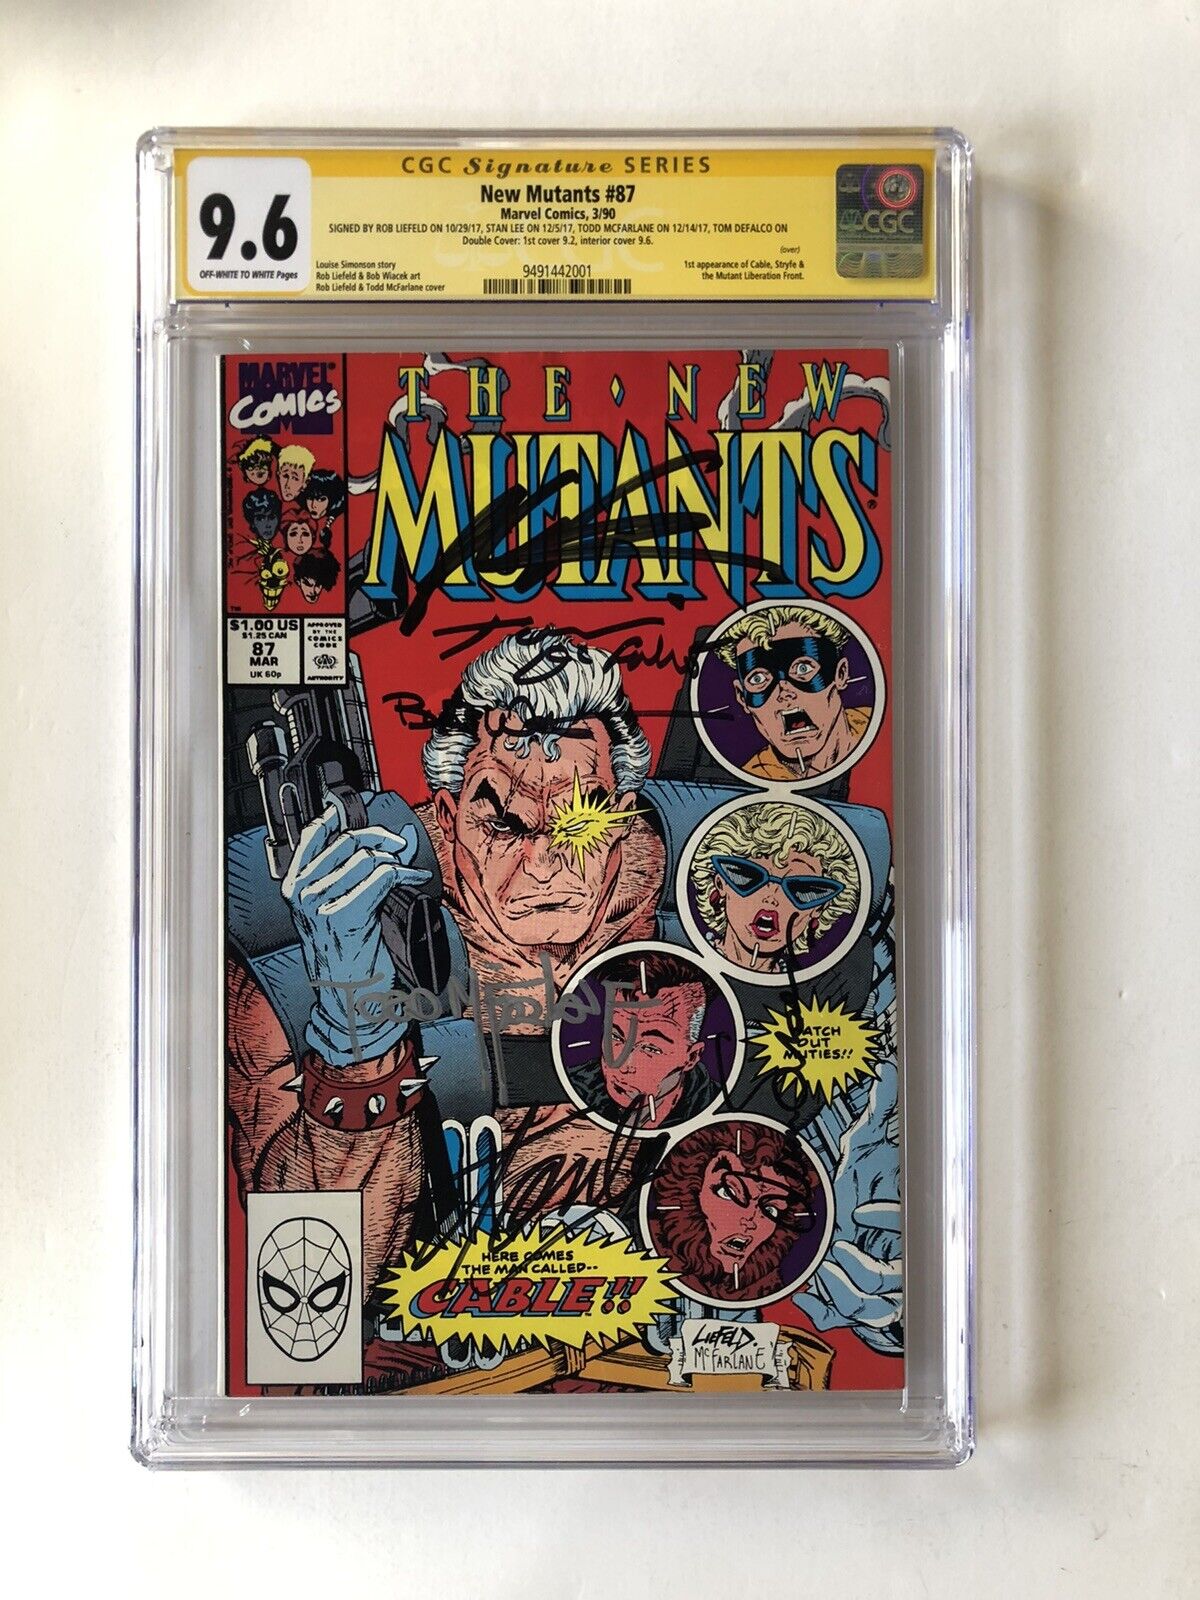 NEW MUTANTS #87 CGC SS 9.6 1ST APP CABLE 6x Stan Lee McFarlane +4 Double COVER